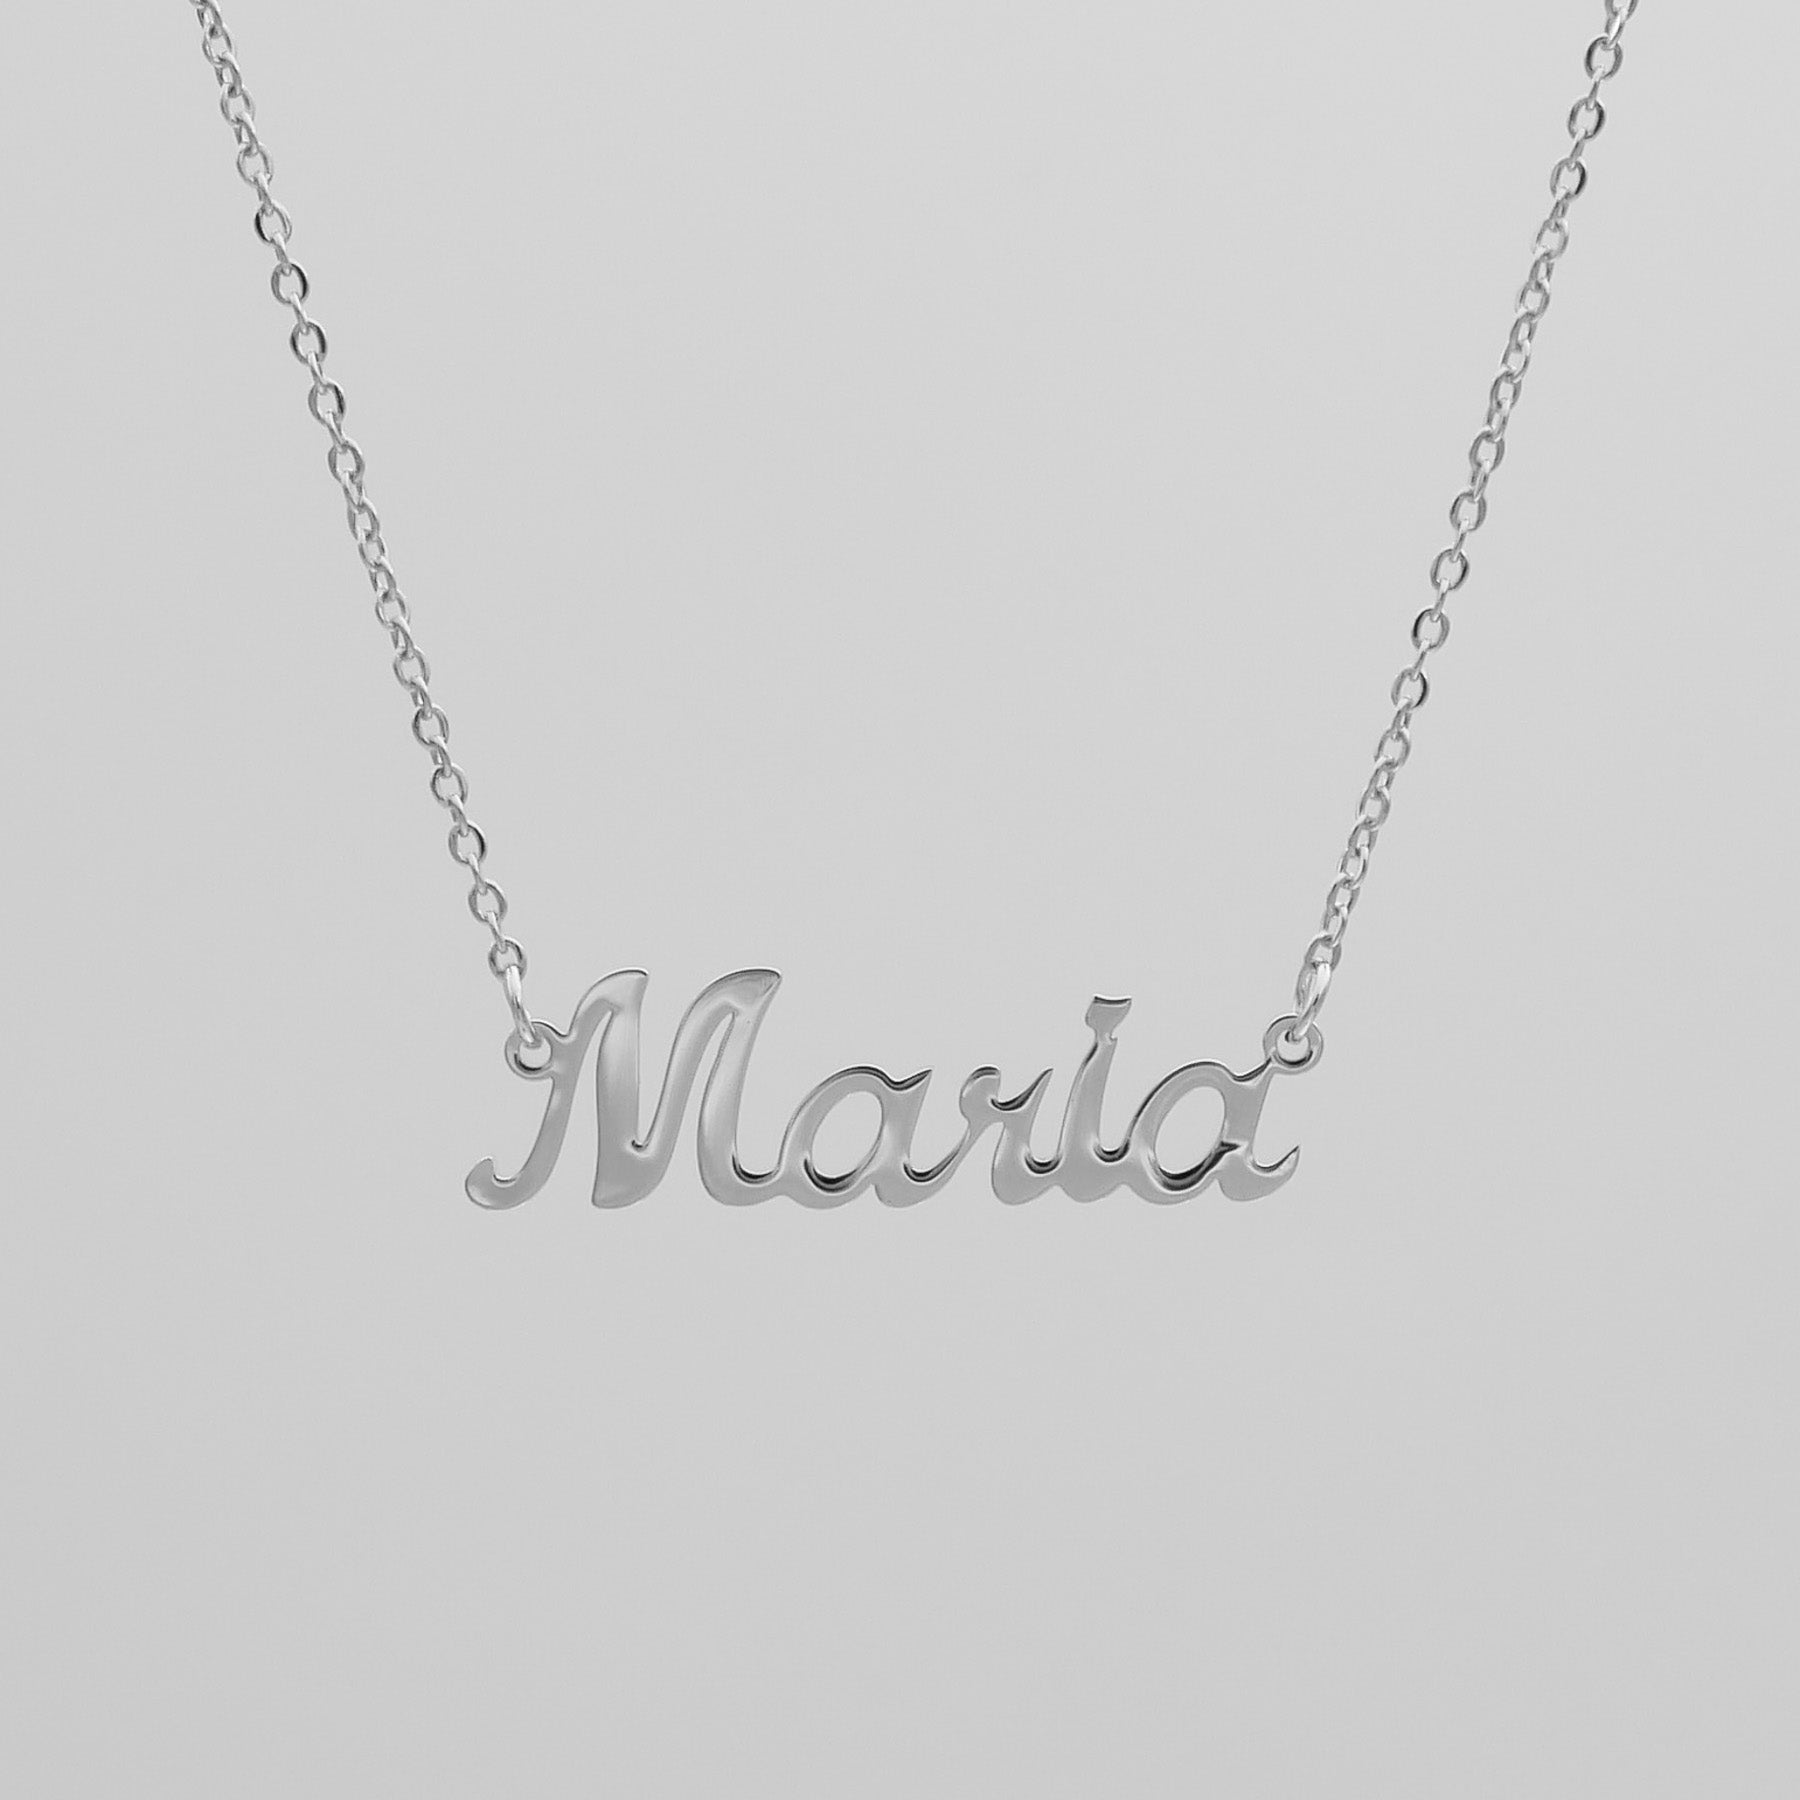 Silver custom name necklace suspended in the air